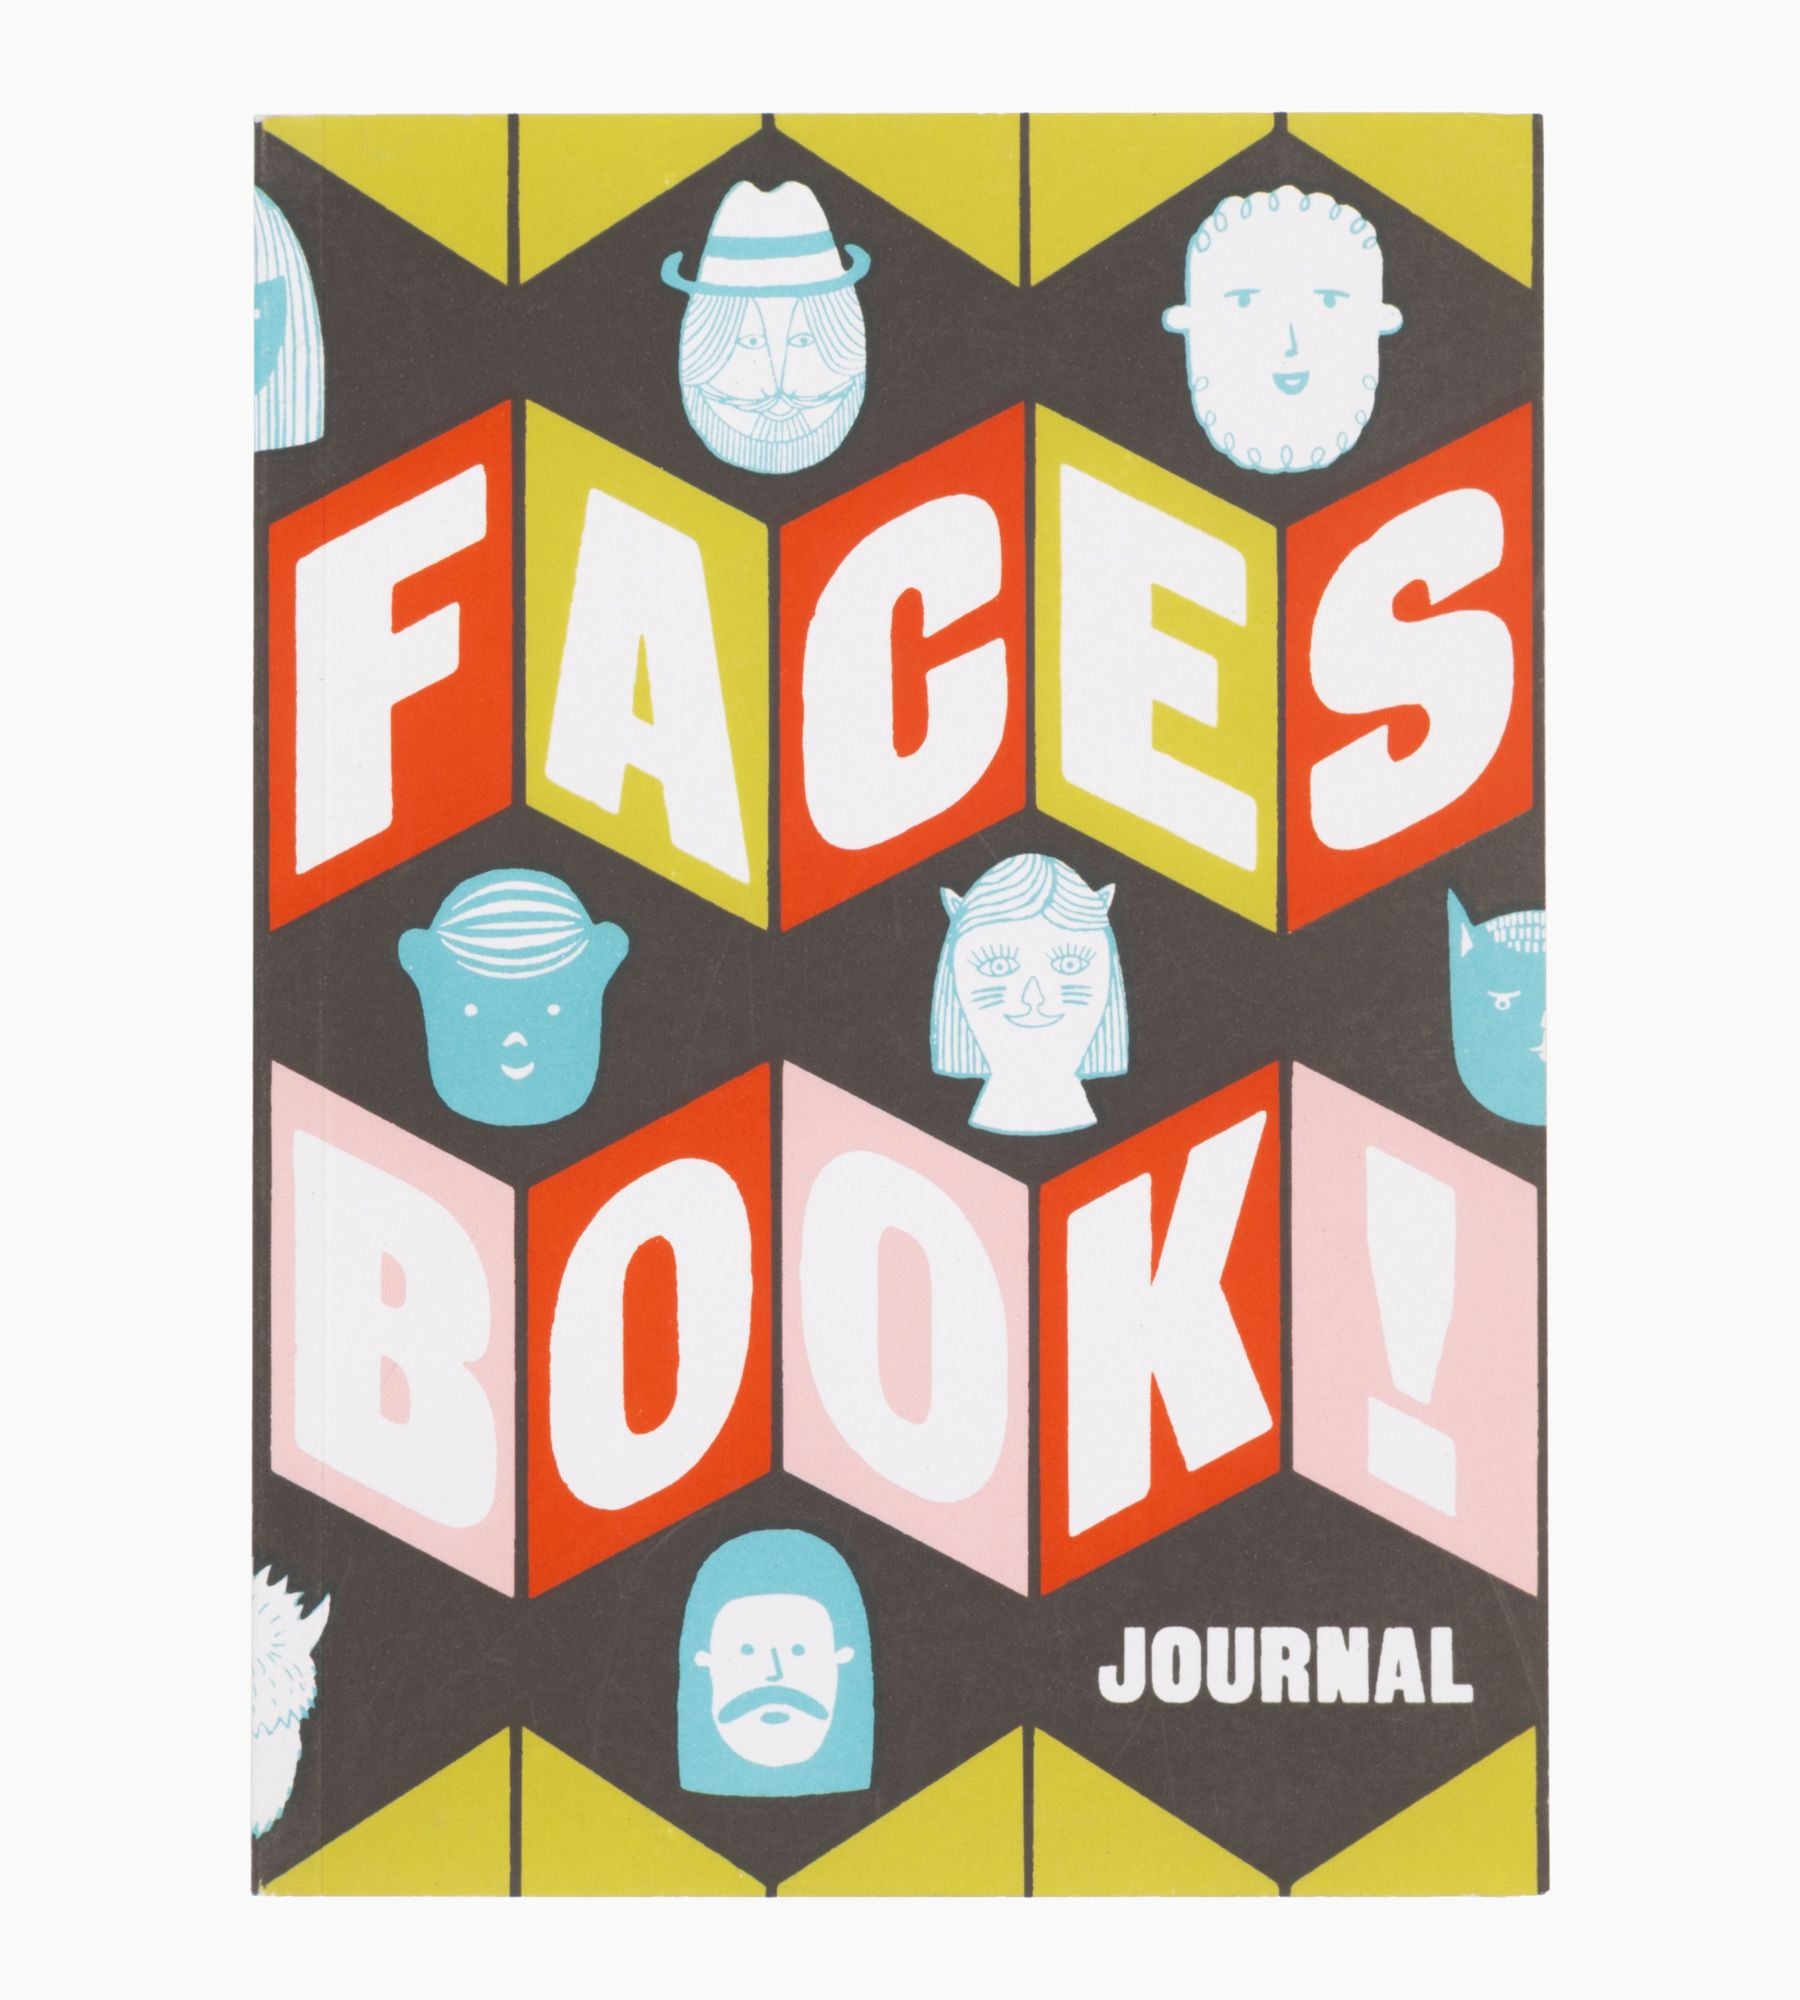 'Faces book' journal